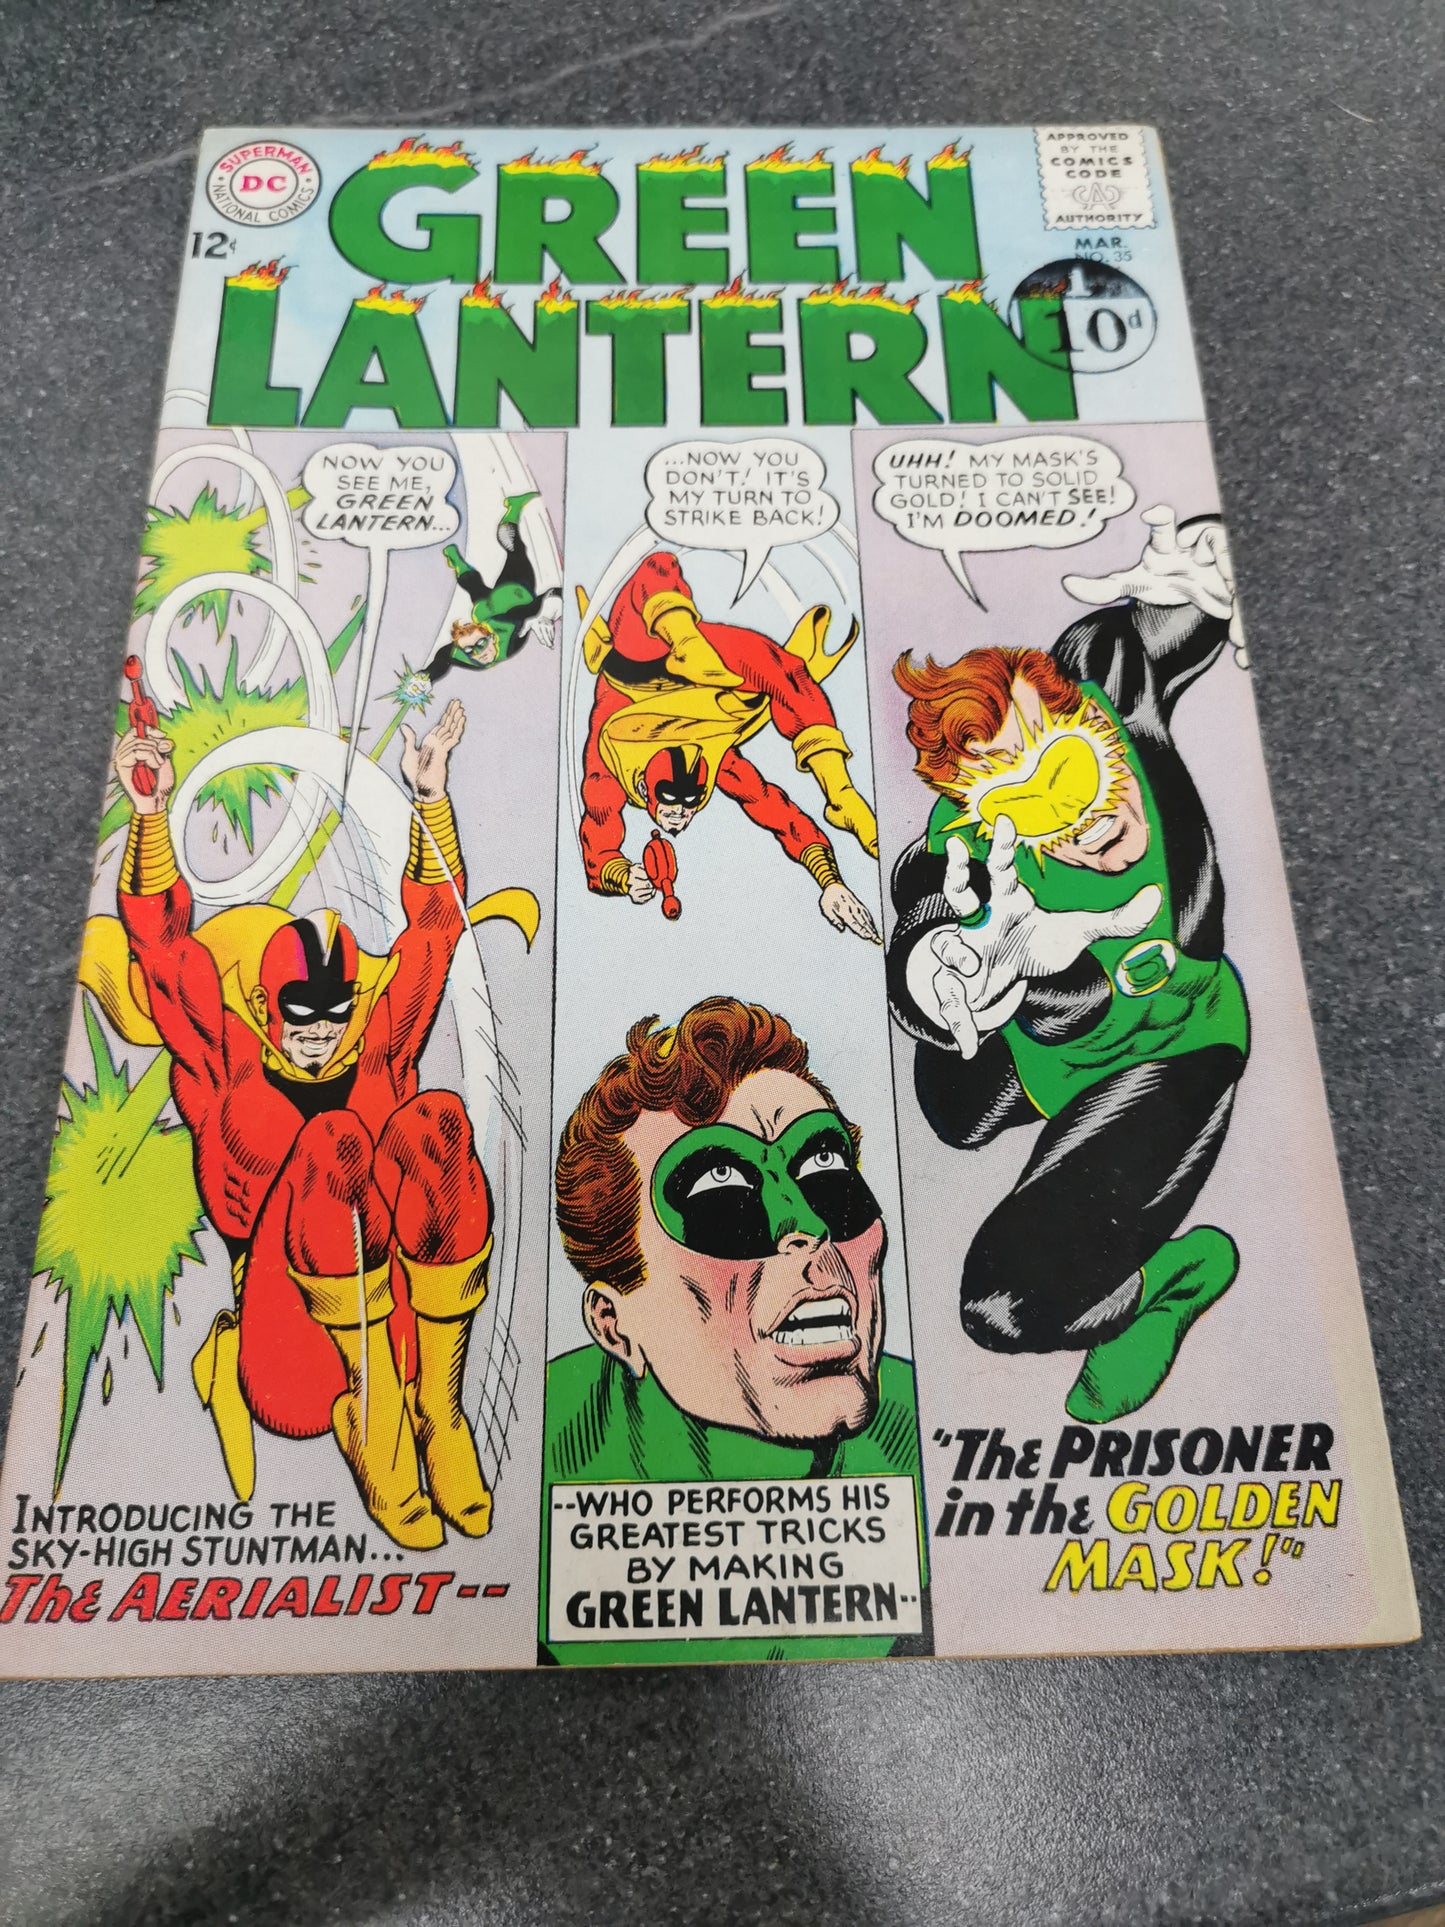 Green Lantern #35 1965 1st appearance of the Aerialist DC comic